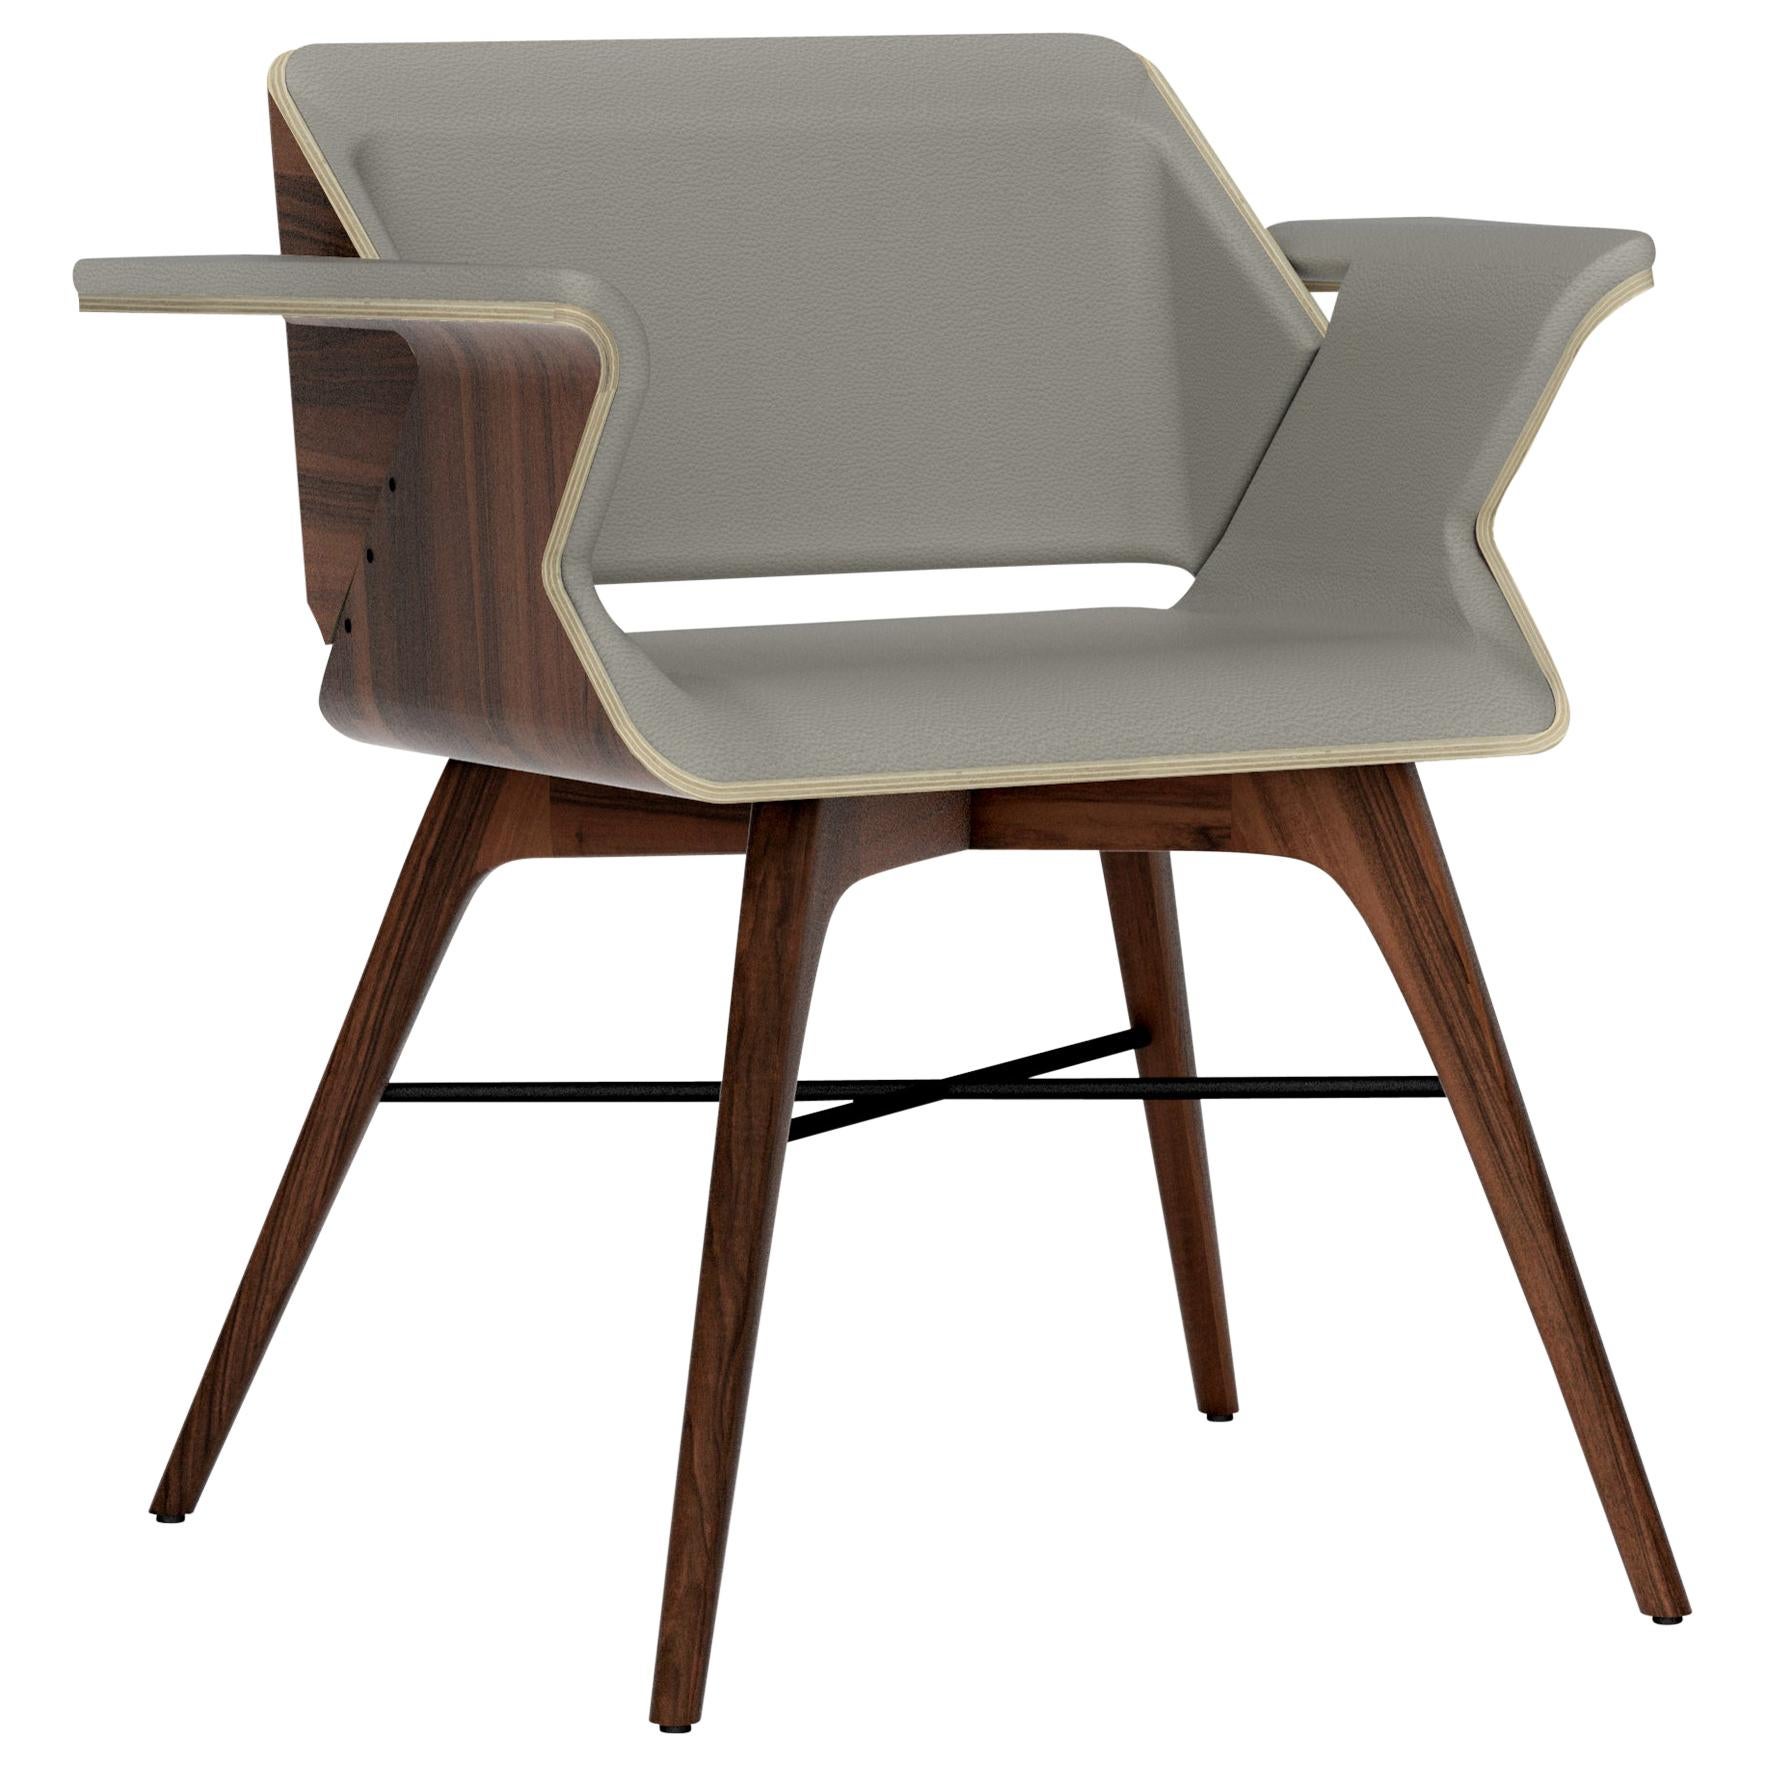 Ash and Walnut Contemporary Chair by Alexandre Caldas